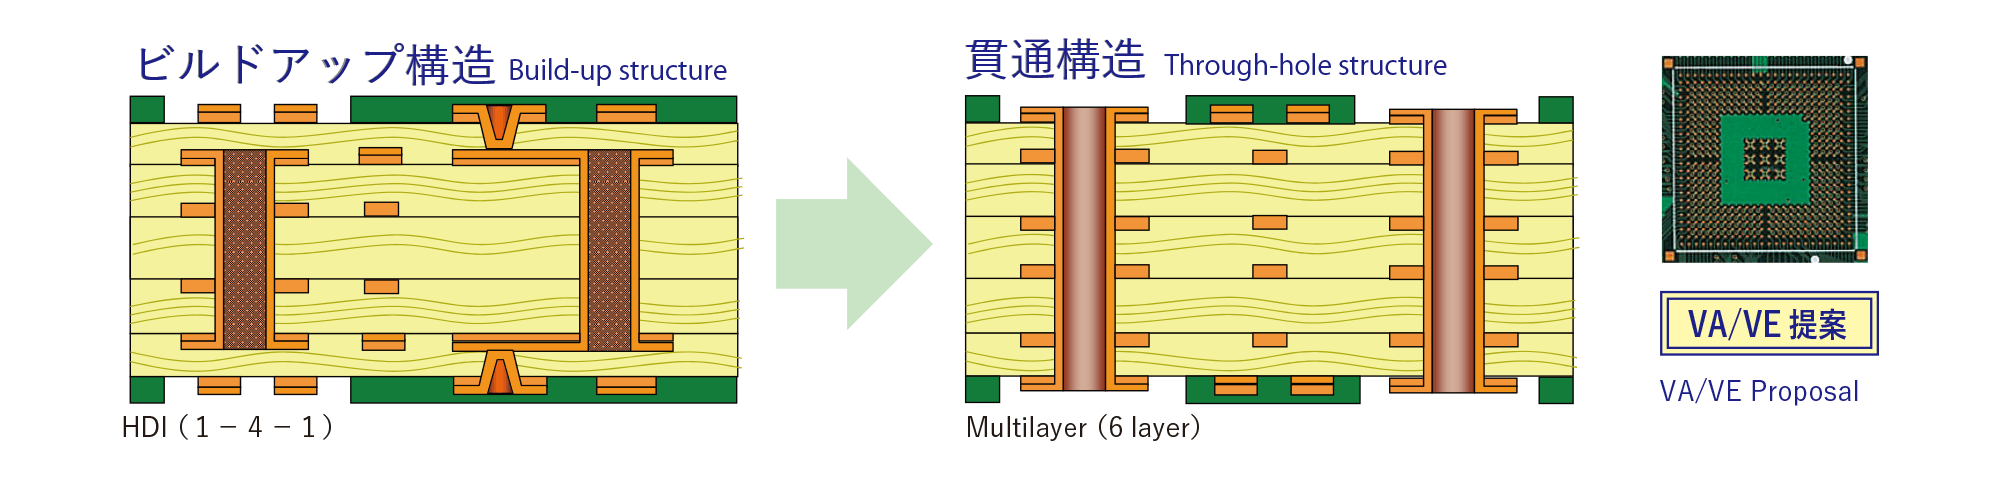 Replacement diagram from build-up structure to through-beam structure